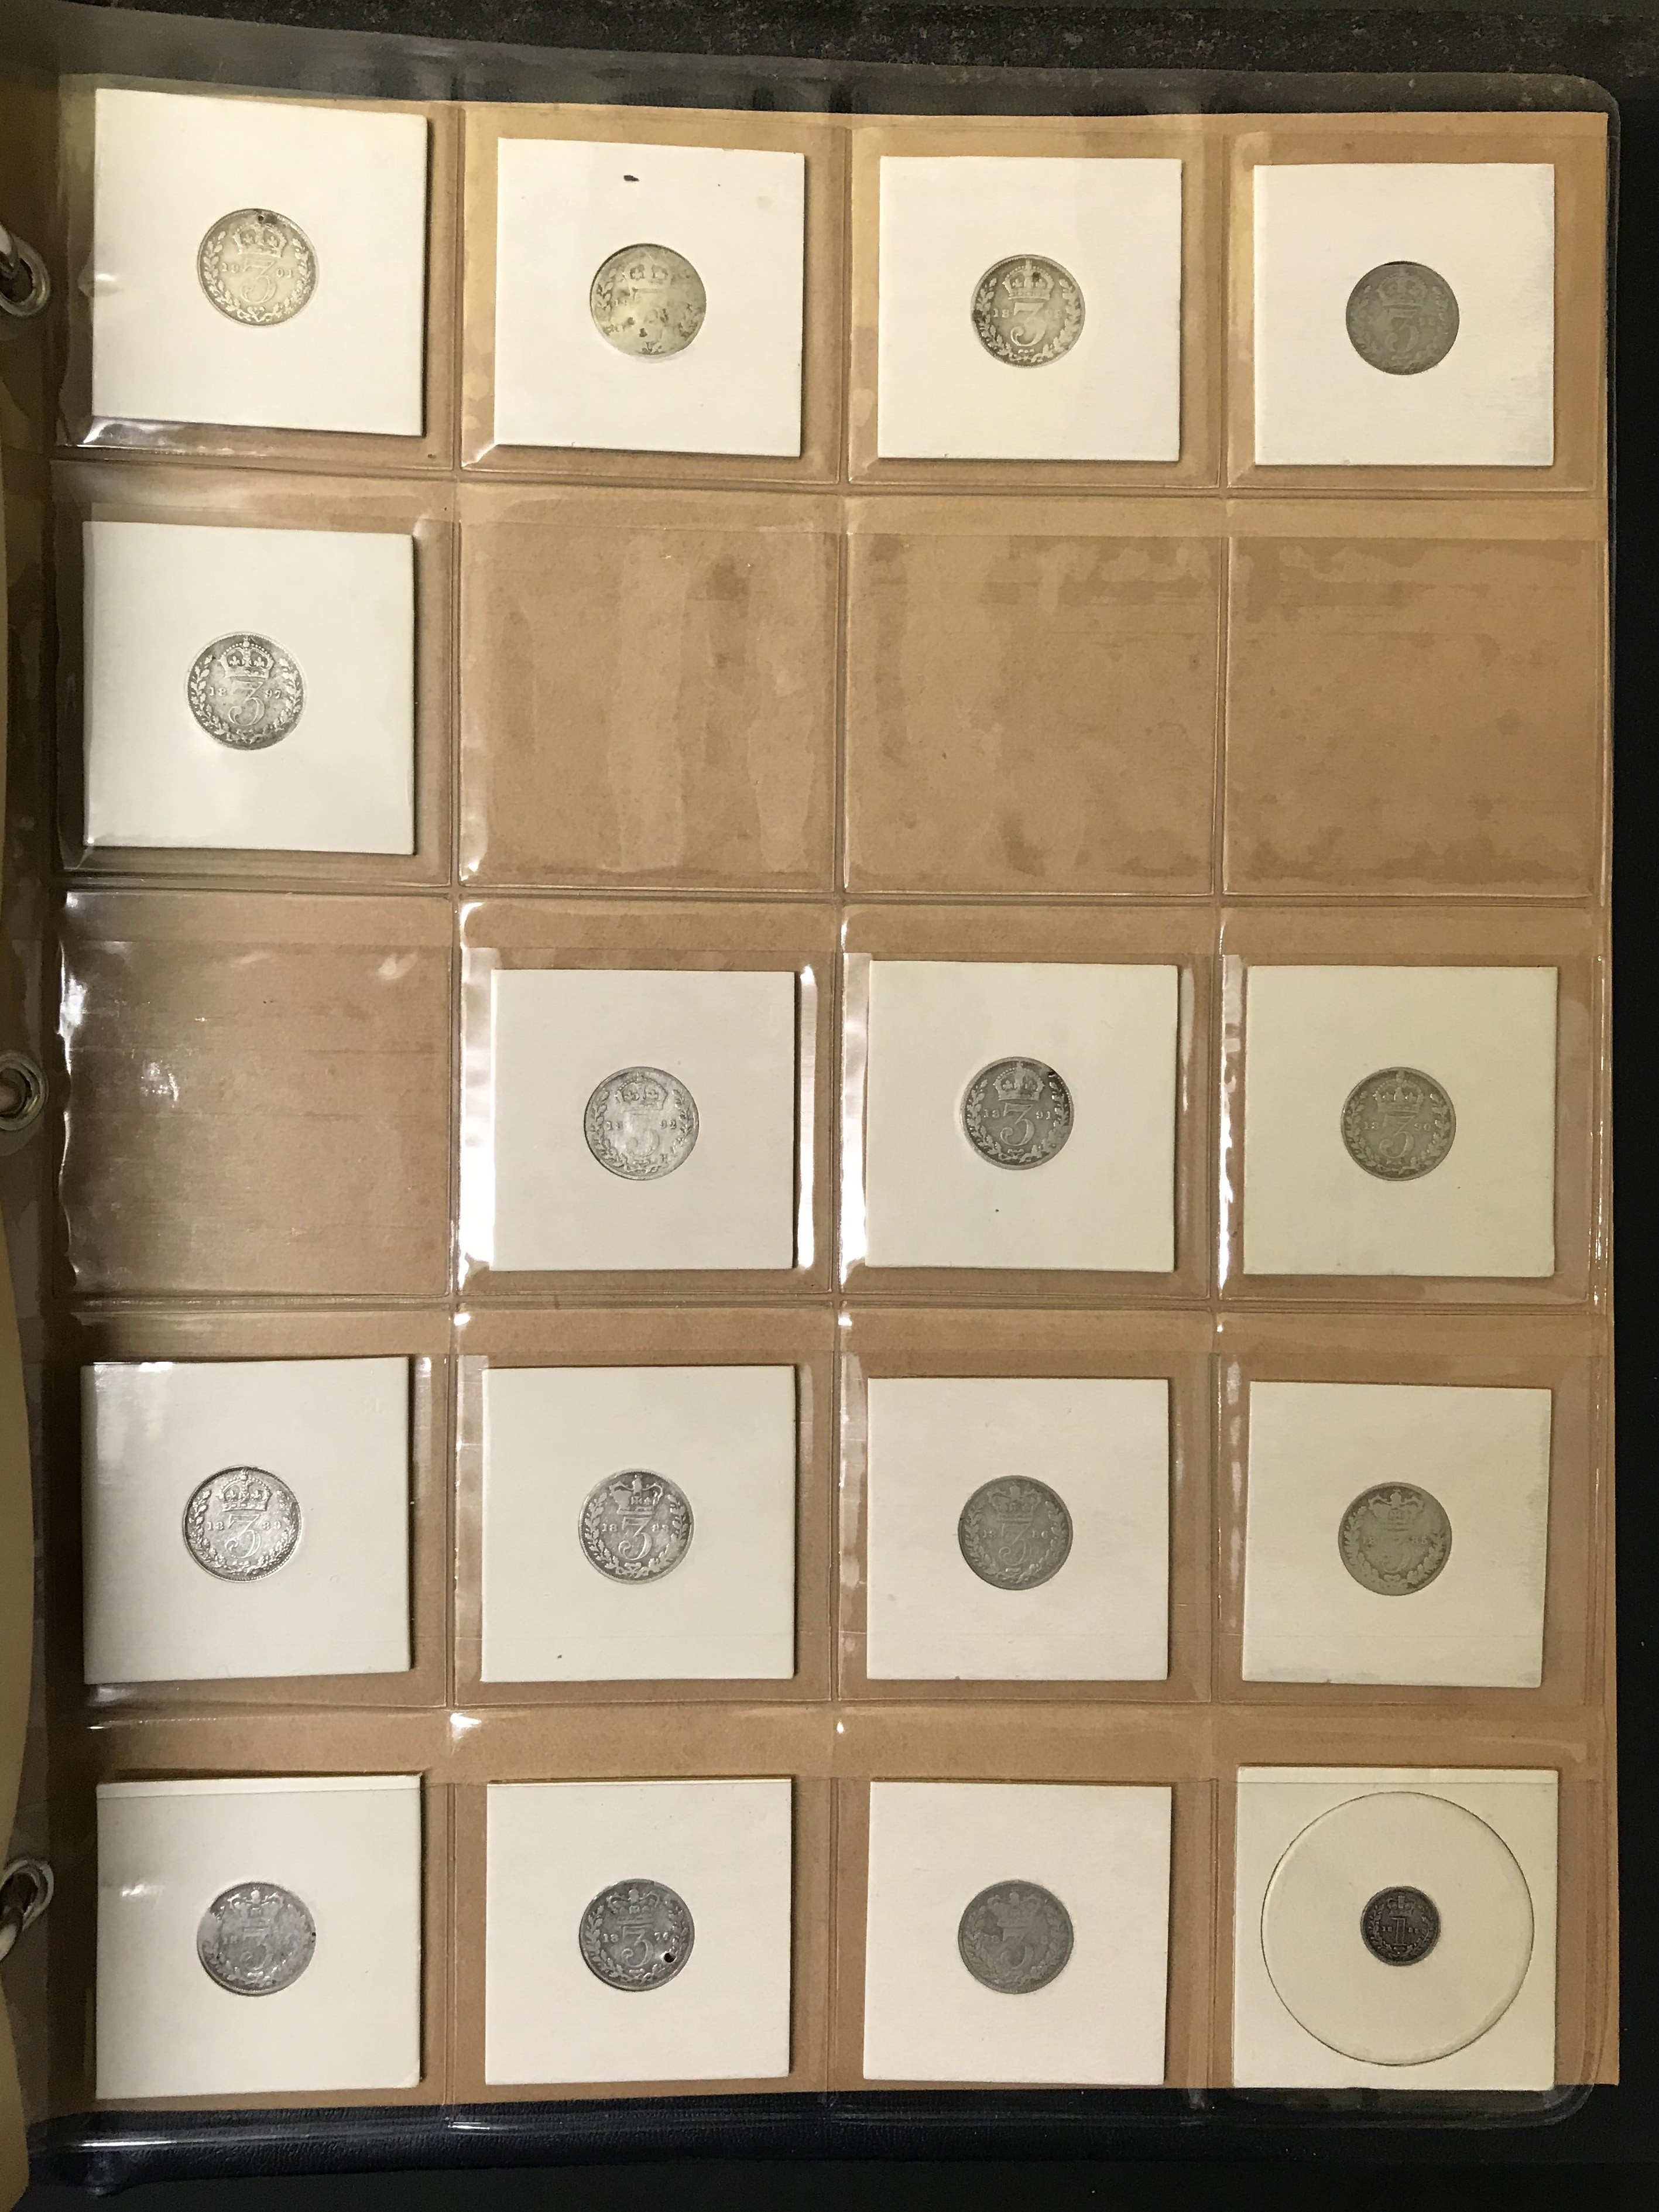 5 albums of coins including silver - Image 10 of 44